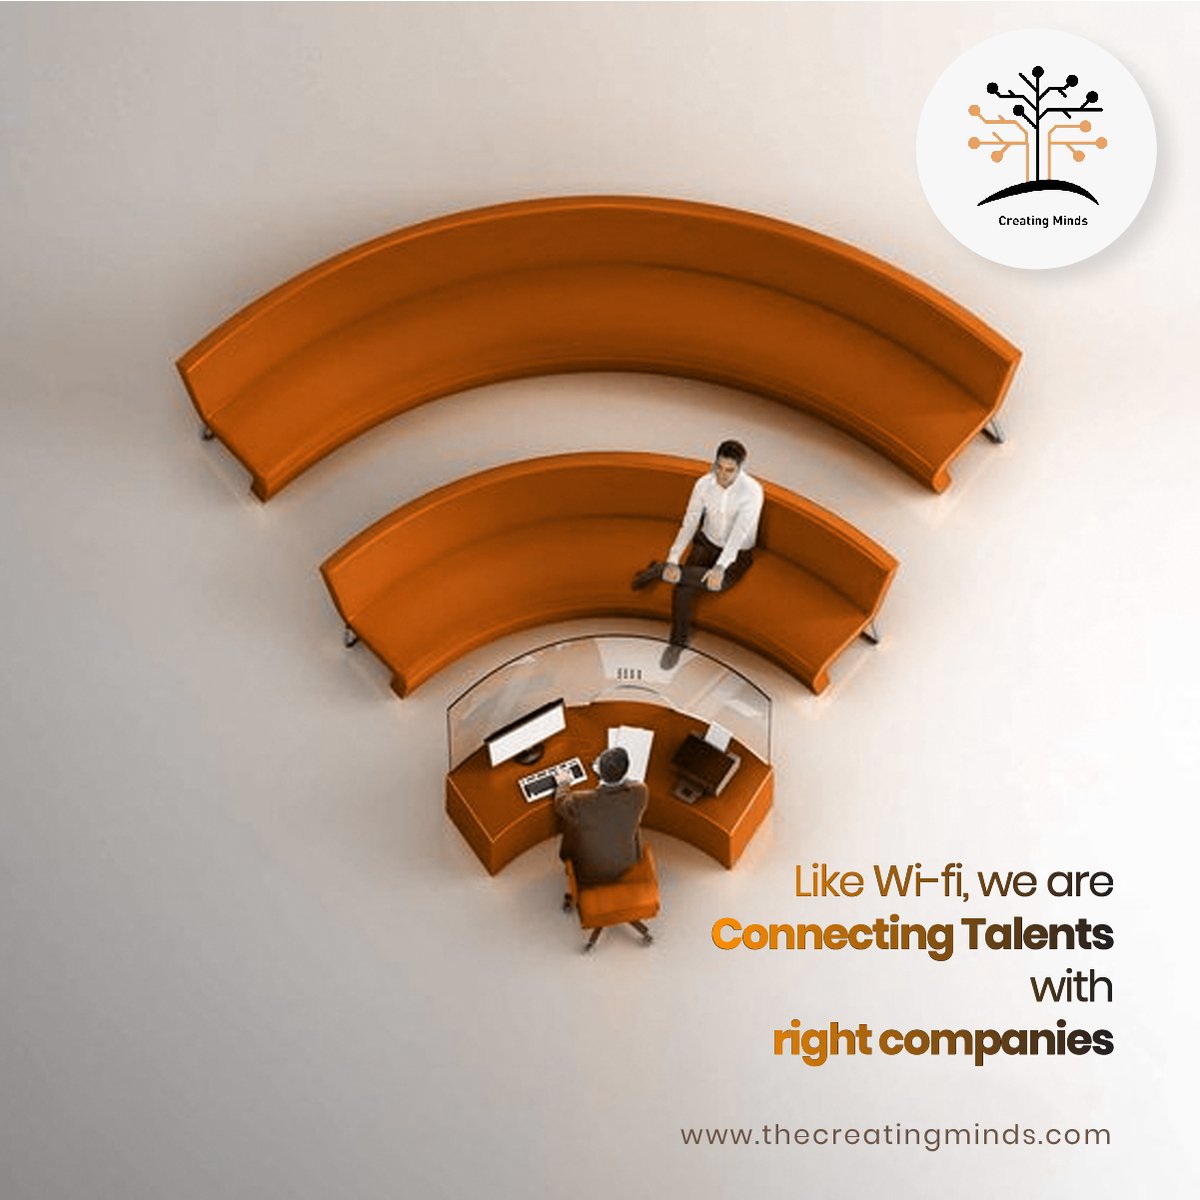 Unlock limitless potential as the ultimate talent matchmaker. Connect individuals with dream employers, sparking extraordinary opportunities. Embrace your power as the Wi-Fi of talent, igniting sparks of greatness. Join us in #ConnectingDreams #EmpoweringTalents #CareerSuccess